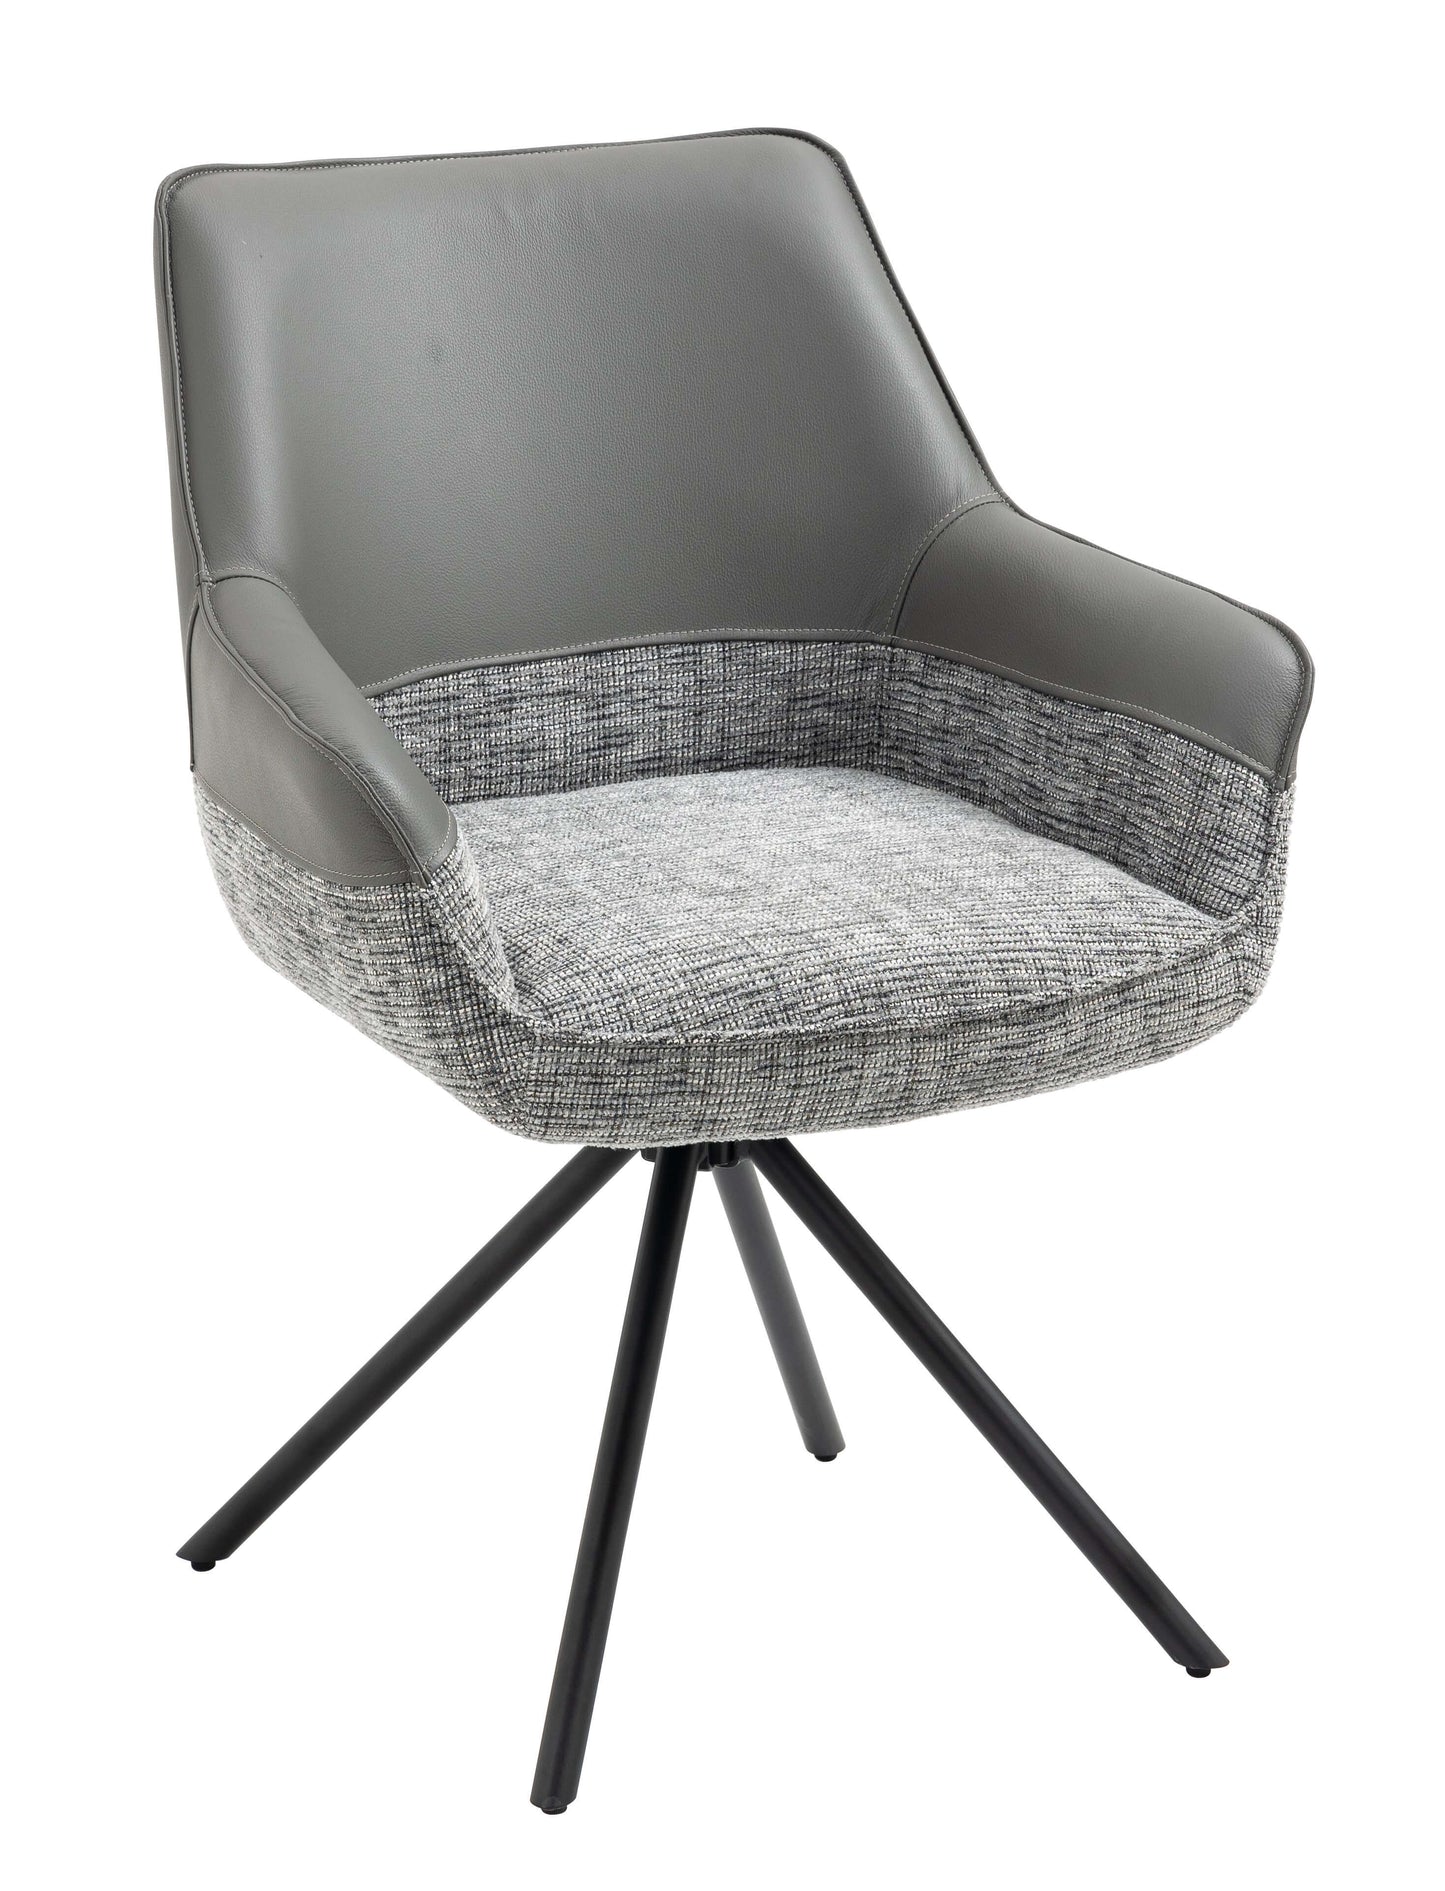 Carnarvon | Modern Leather Fabric Swivel Dining Chair With Arms | Set Of 2 | Grey